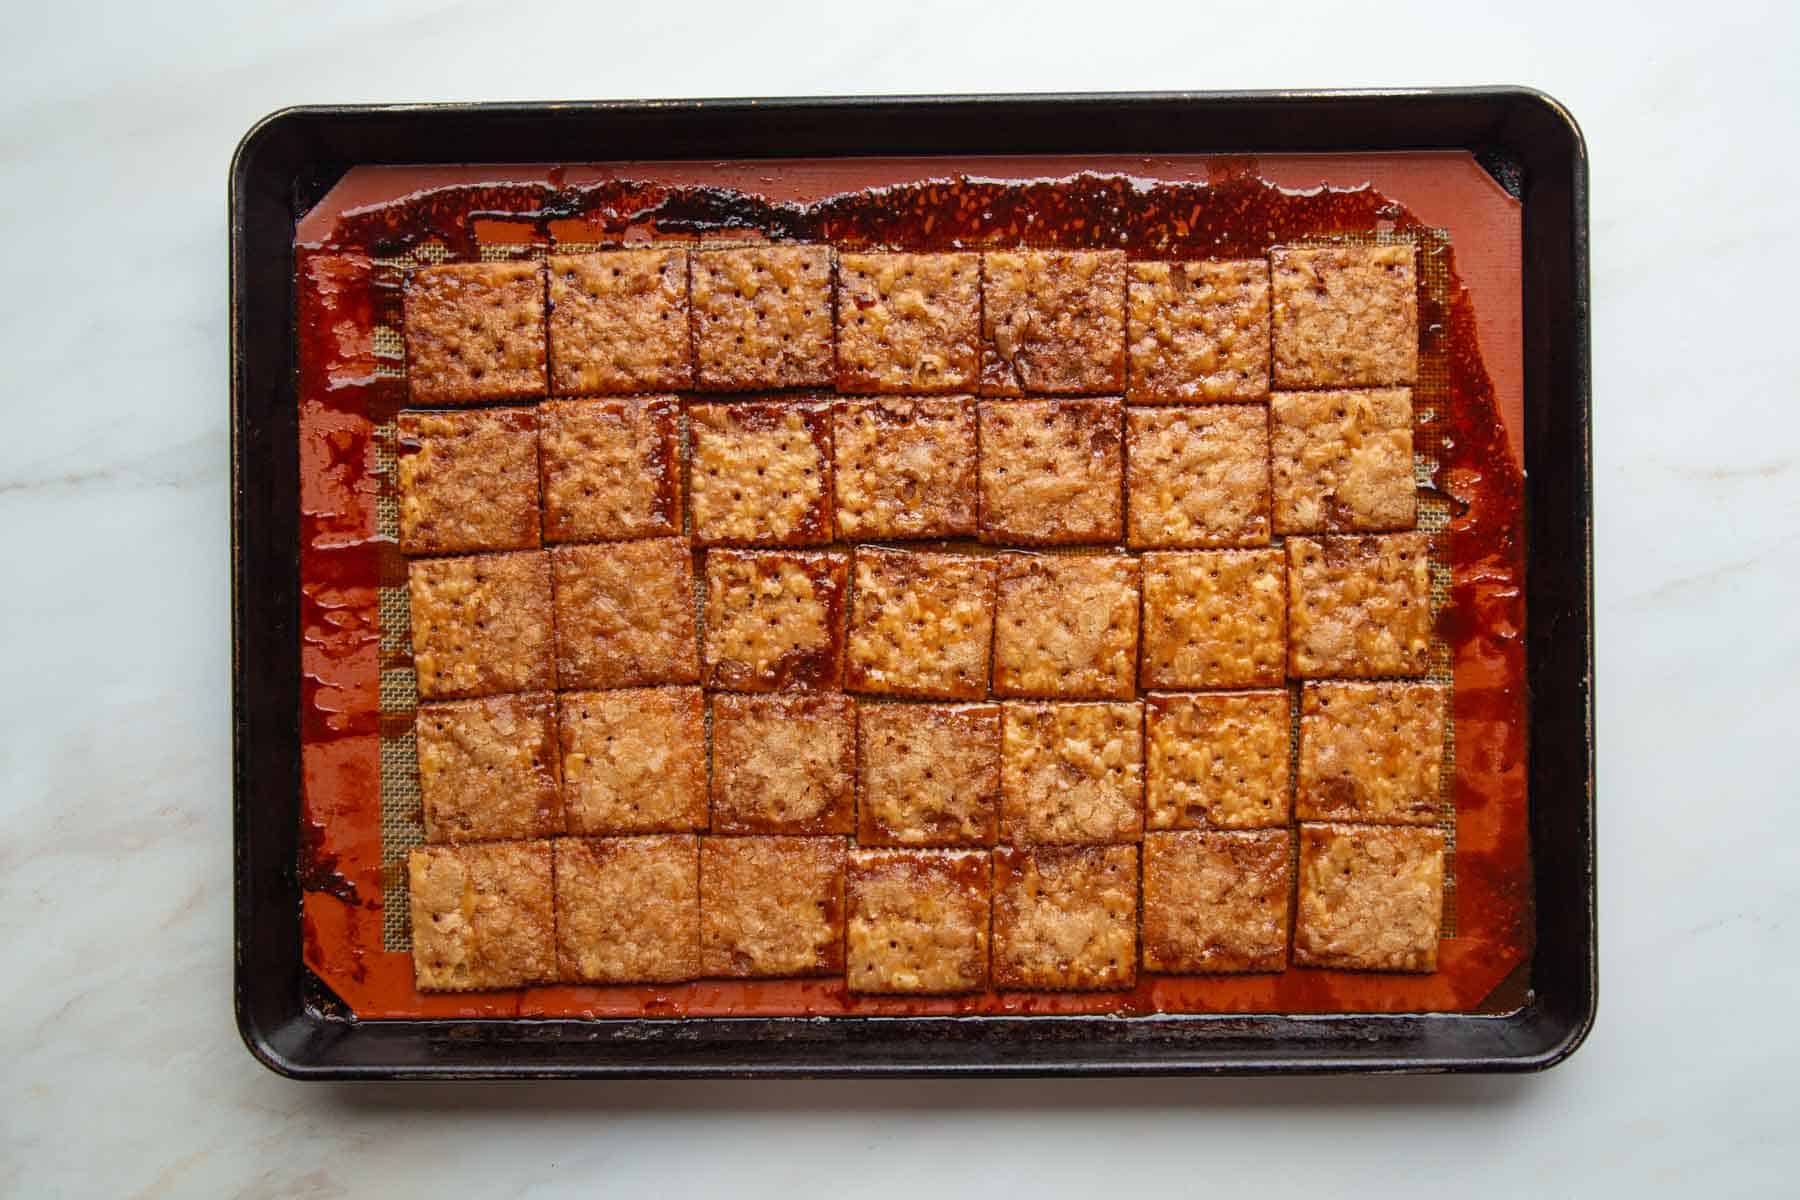 baked and caramelized saltine crackers on a baking sheet.